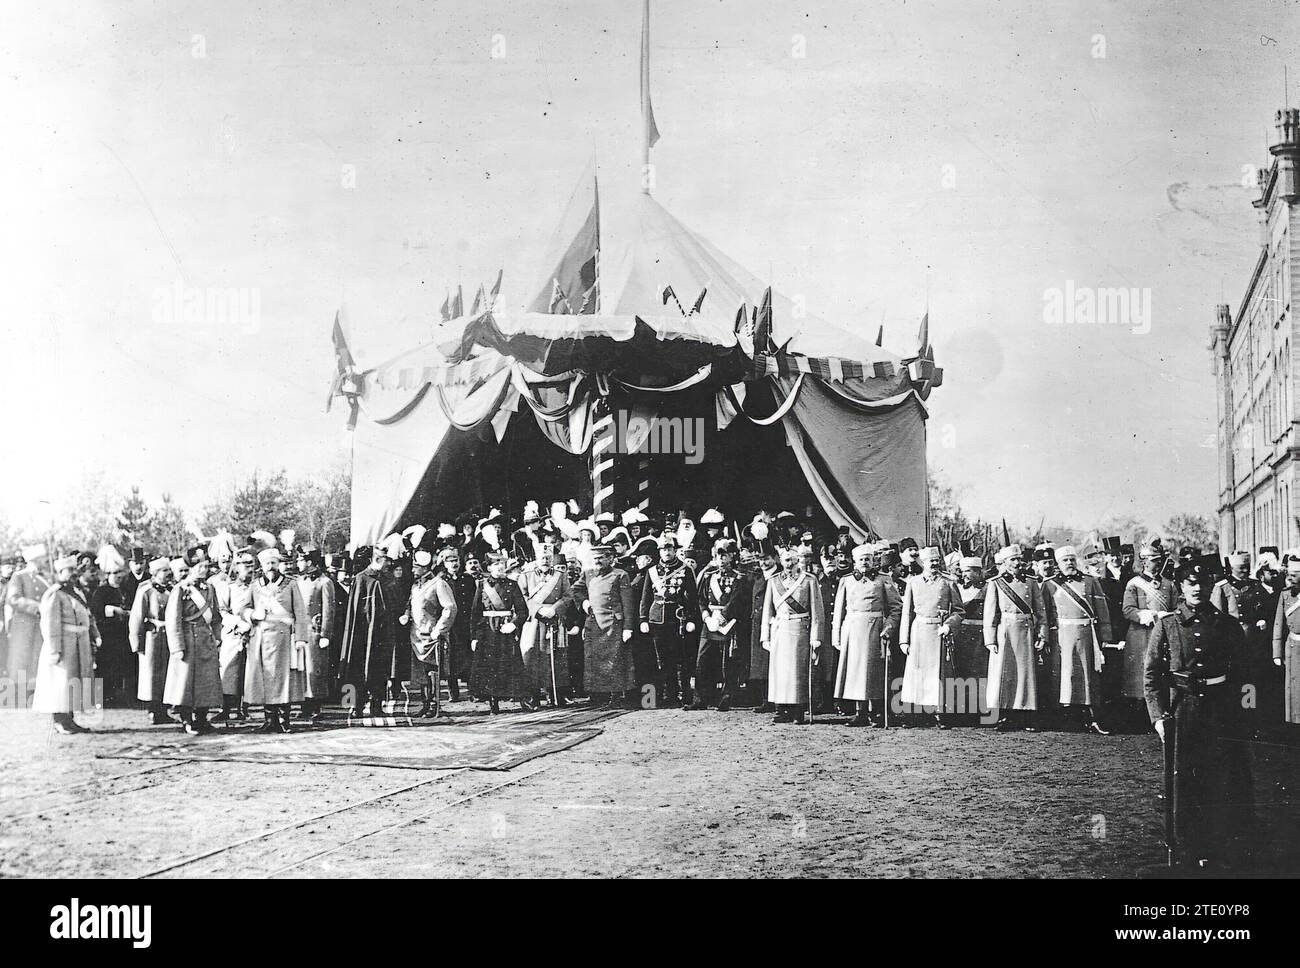 01/31/1912. Coming of age of a Prince. The Royal tribune from which they witnessed the military parade in Sofia, during the festivities that celebrated the coming of age of Prince Boris, King Ferdinand of Bulgaria and Princes Ferdinand of Romania and Alexander of Serbia. Credit: Album / Archivo ABC / Charles Chusseau Flaviens Stock Photo